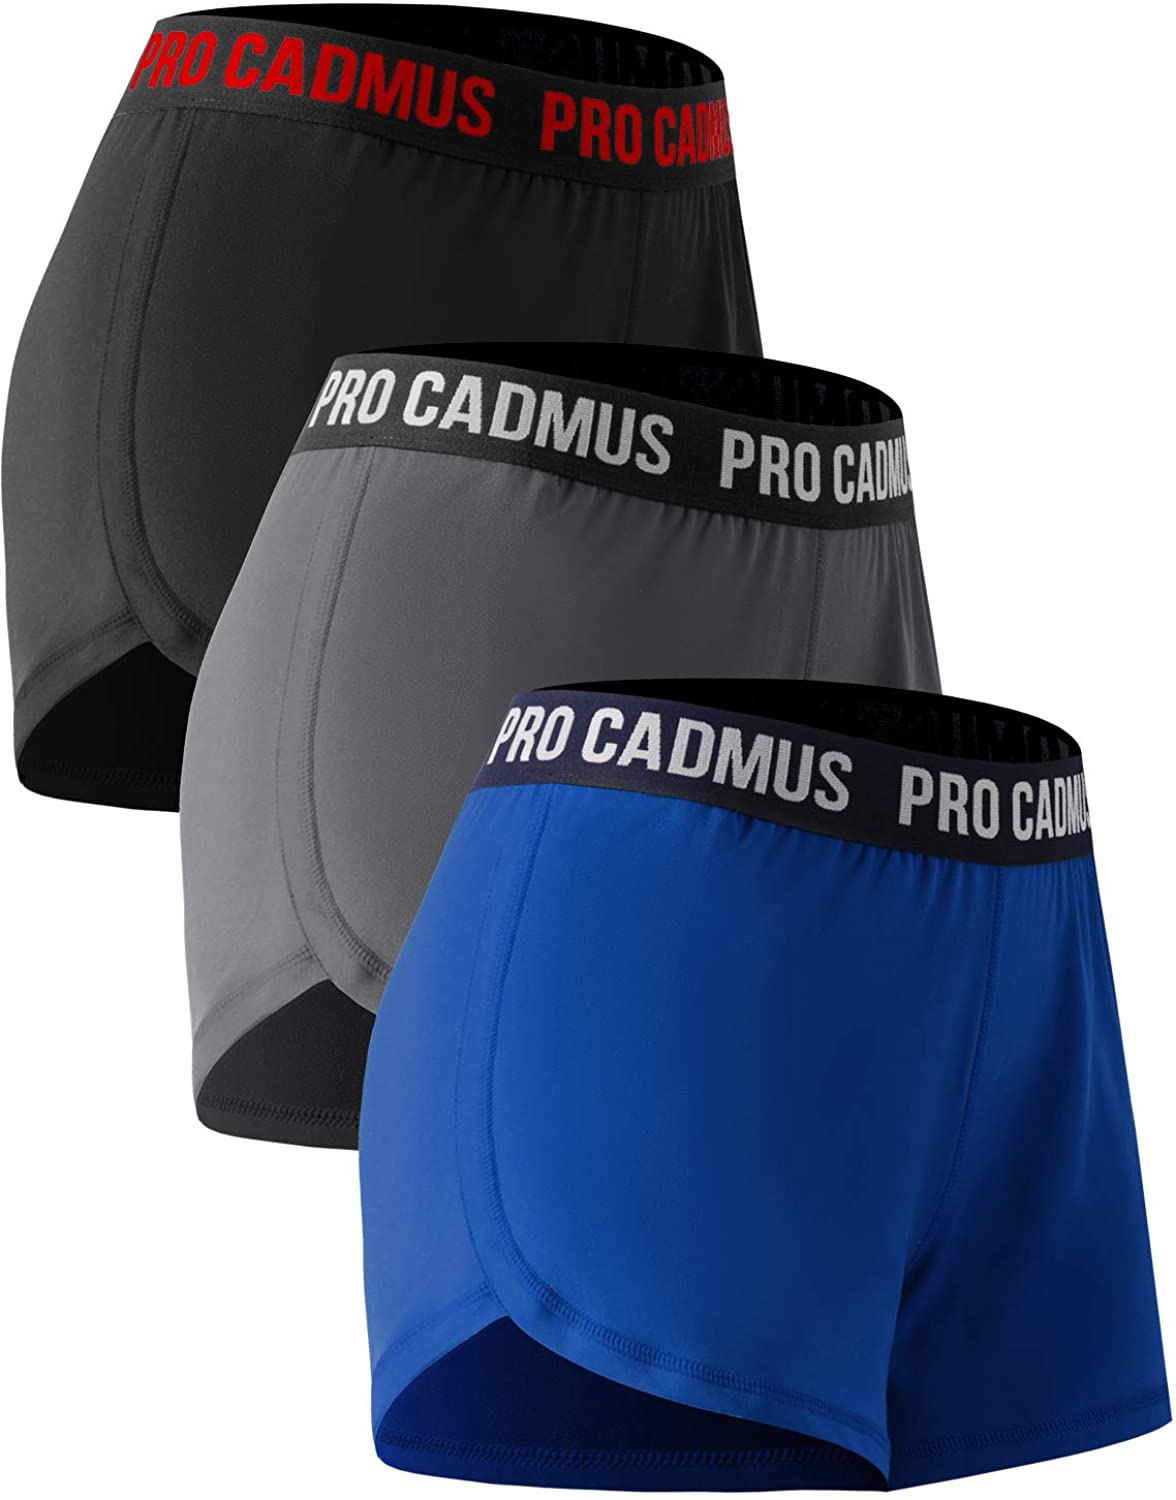 Cadmus Running Shorts for Women Athletic Shorts Workout Gym Pro Pockets 